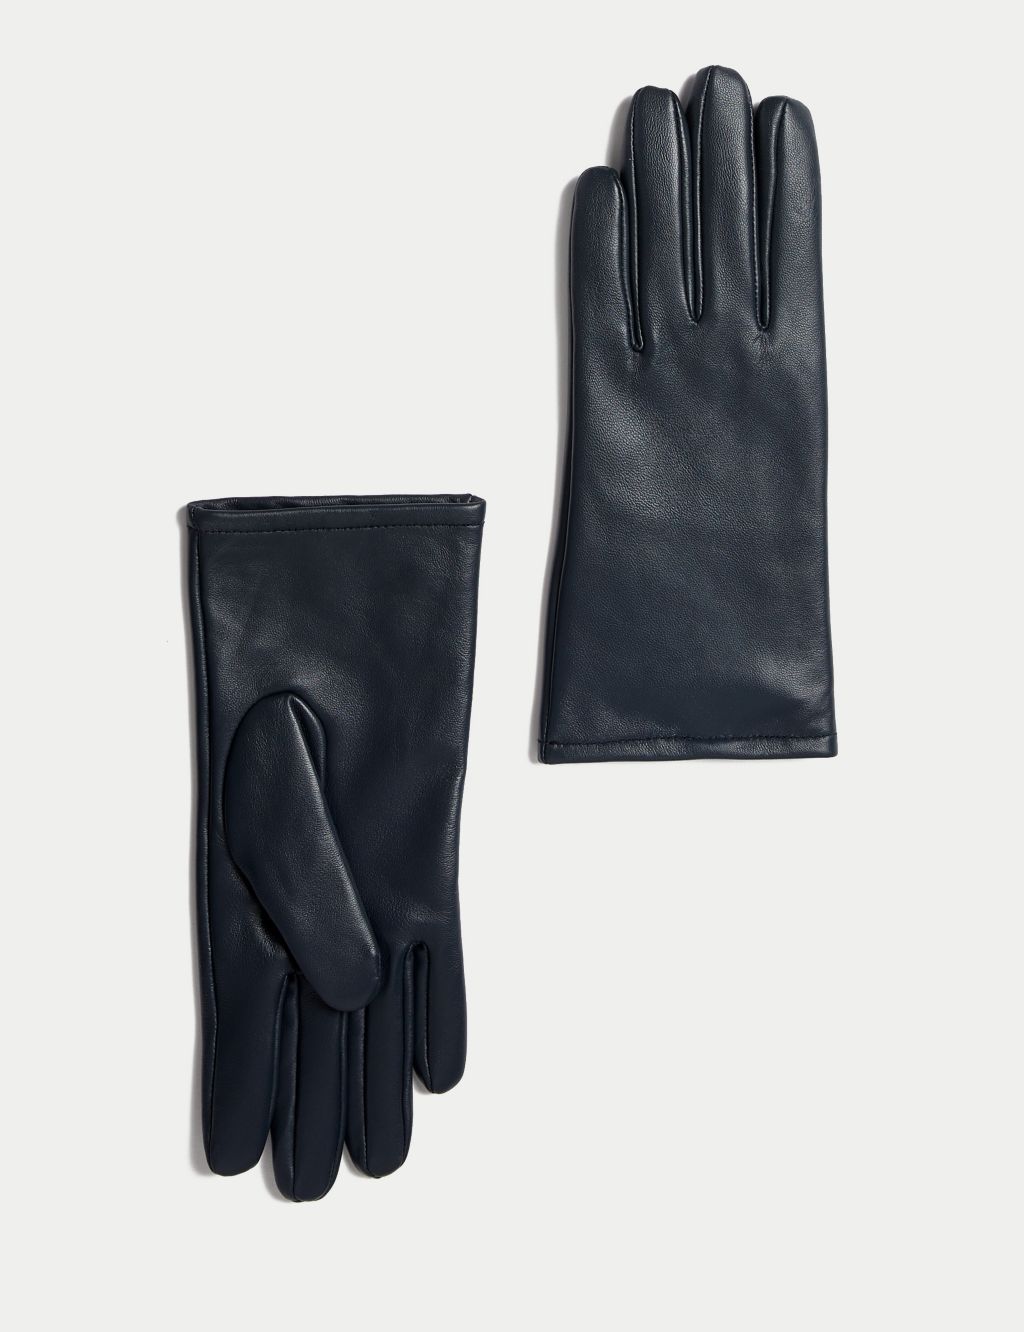 Leather Warm Lined Gloves image 1